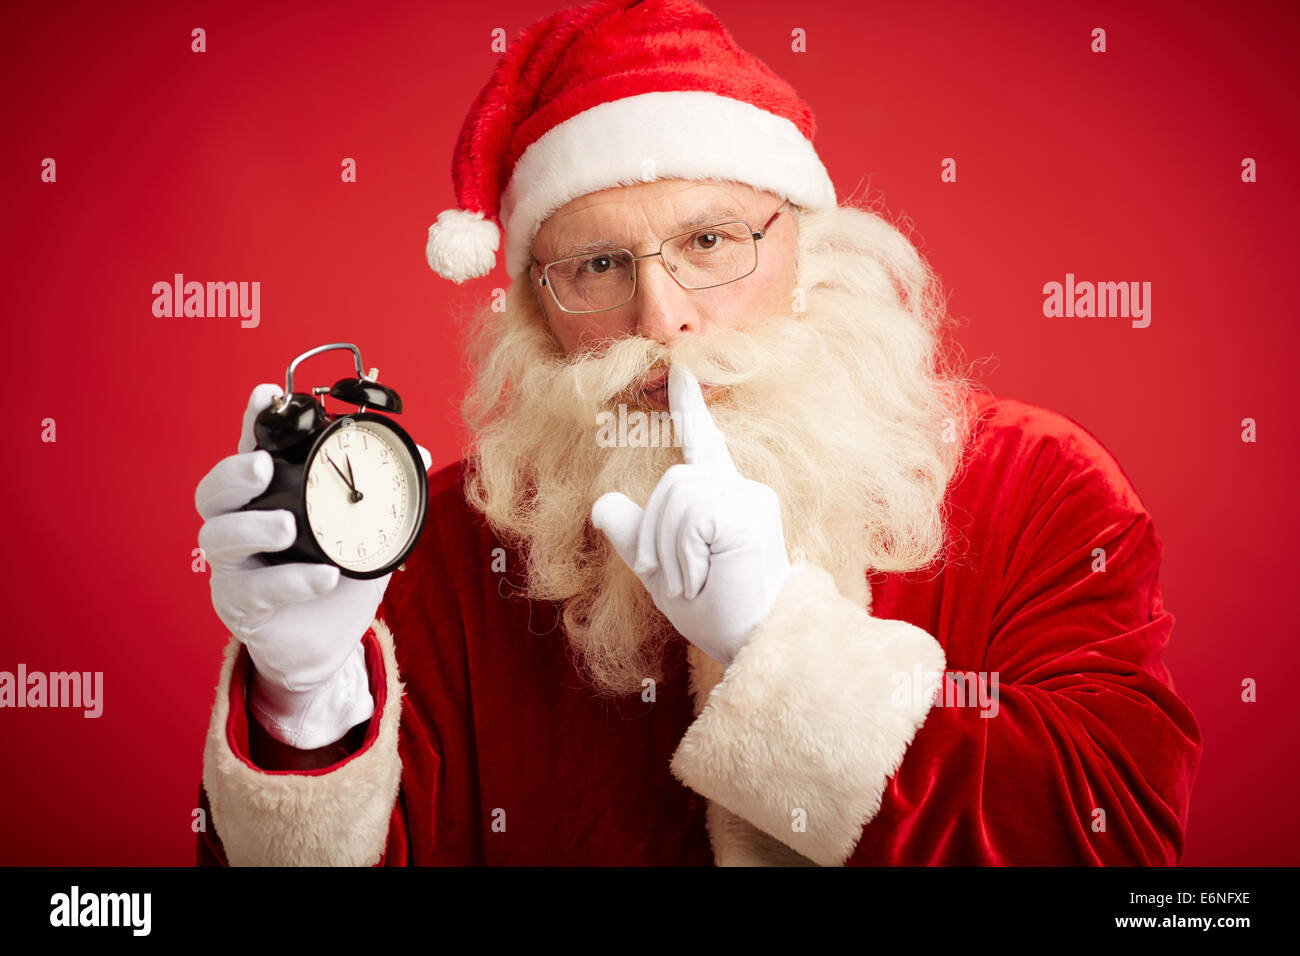 Santa Claus holding clock showing five minutes to midnight and making shhh gesture Stock Photo